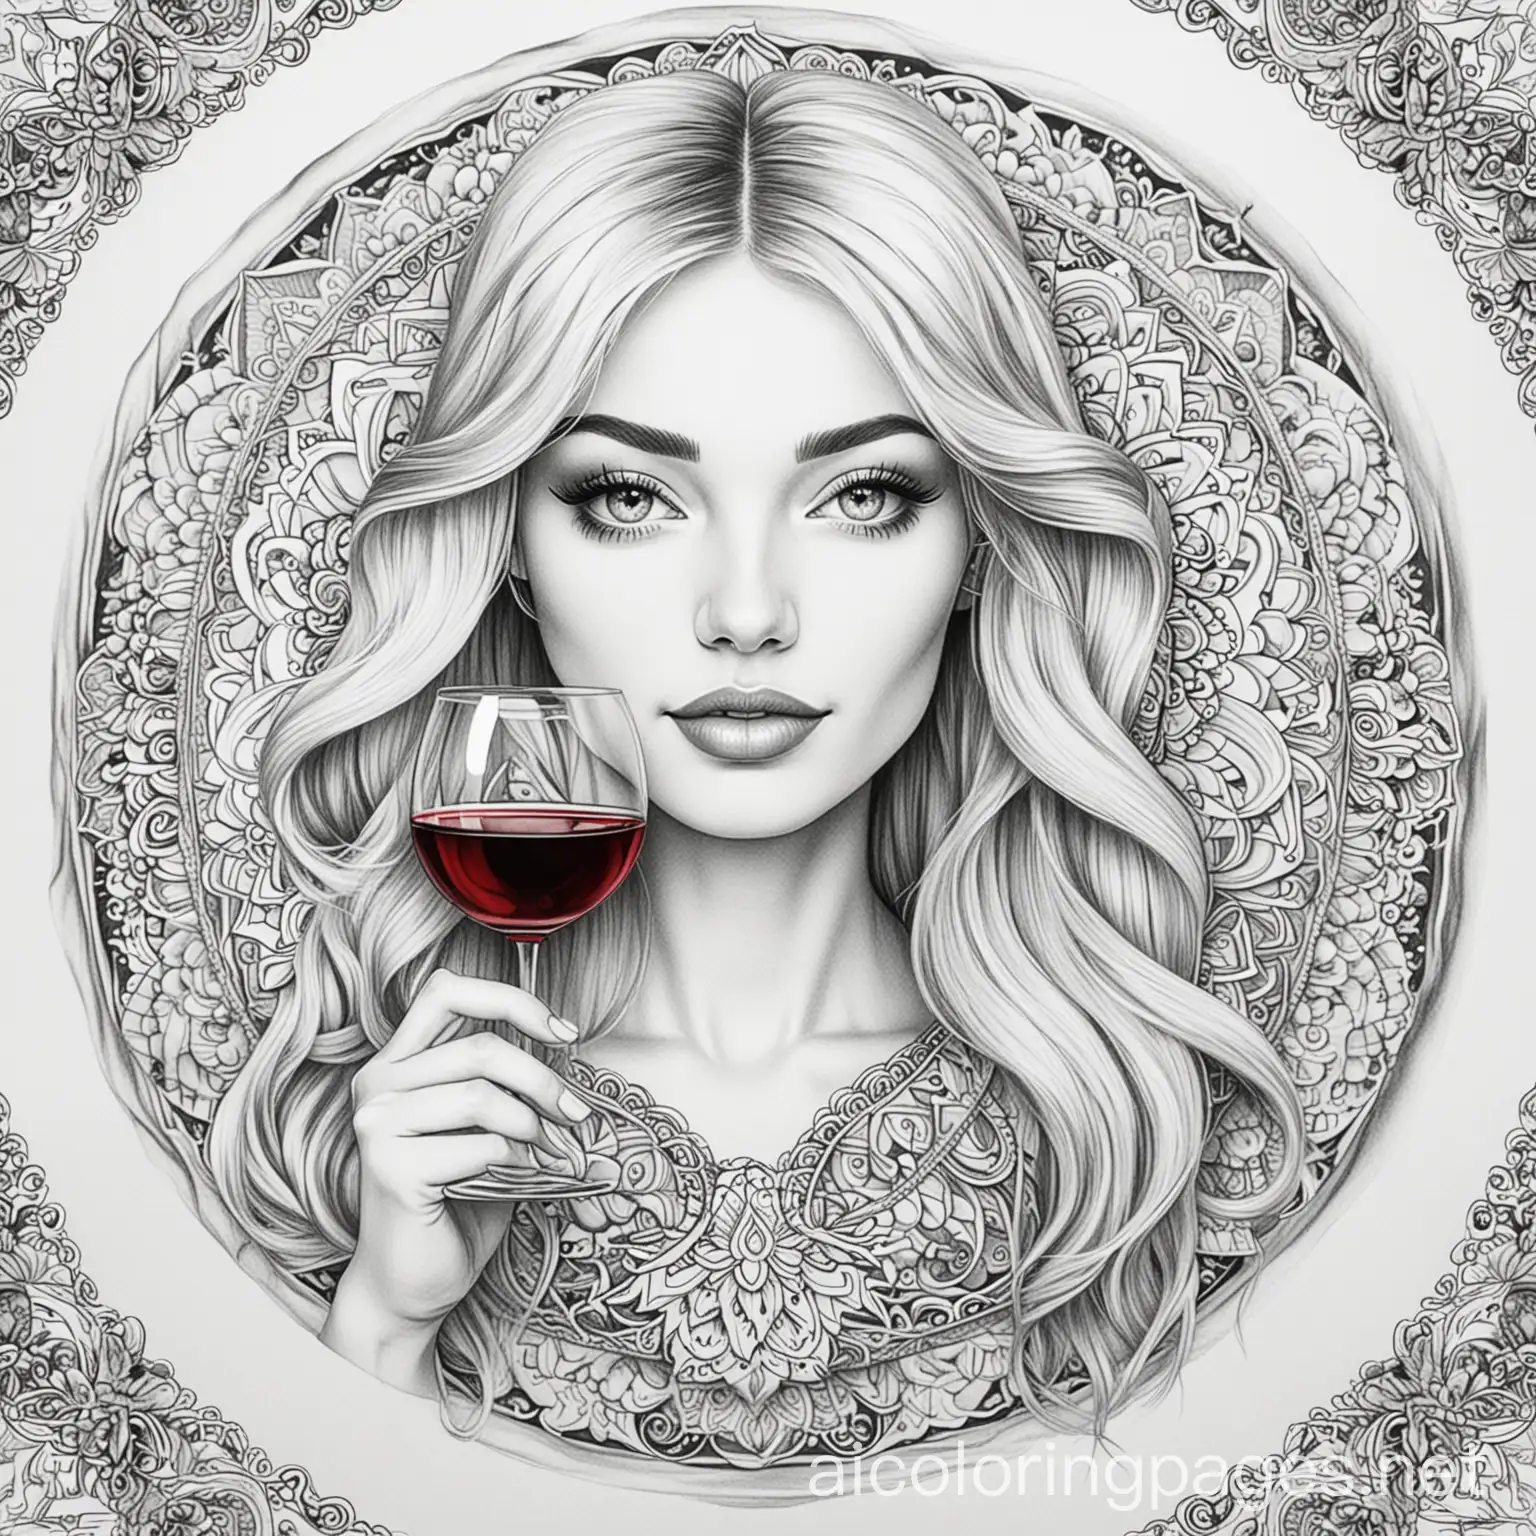 mandala for coloring of woman with long blonde hair with a glass of red wine, Coloring Page, black and white, line art, white background, Simplicity, Ample White Space